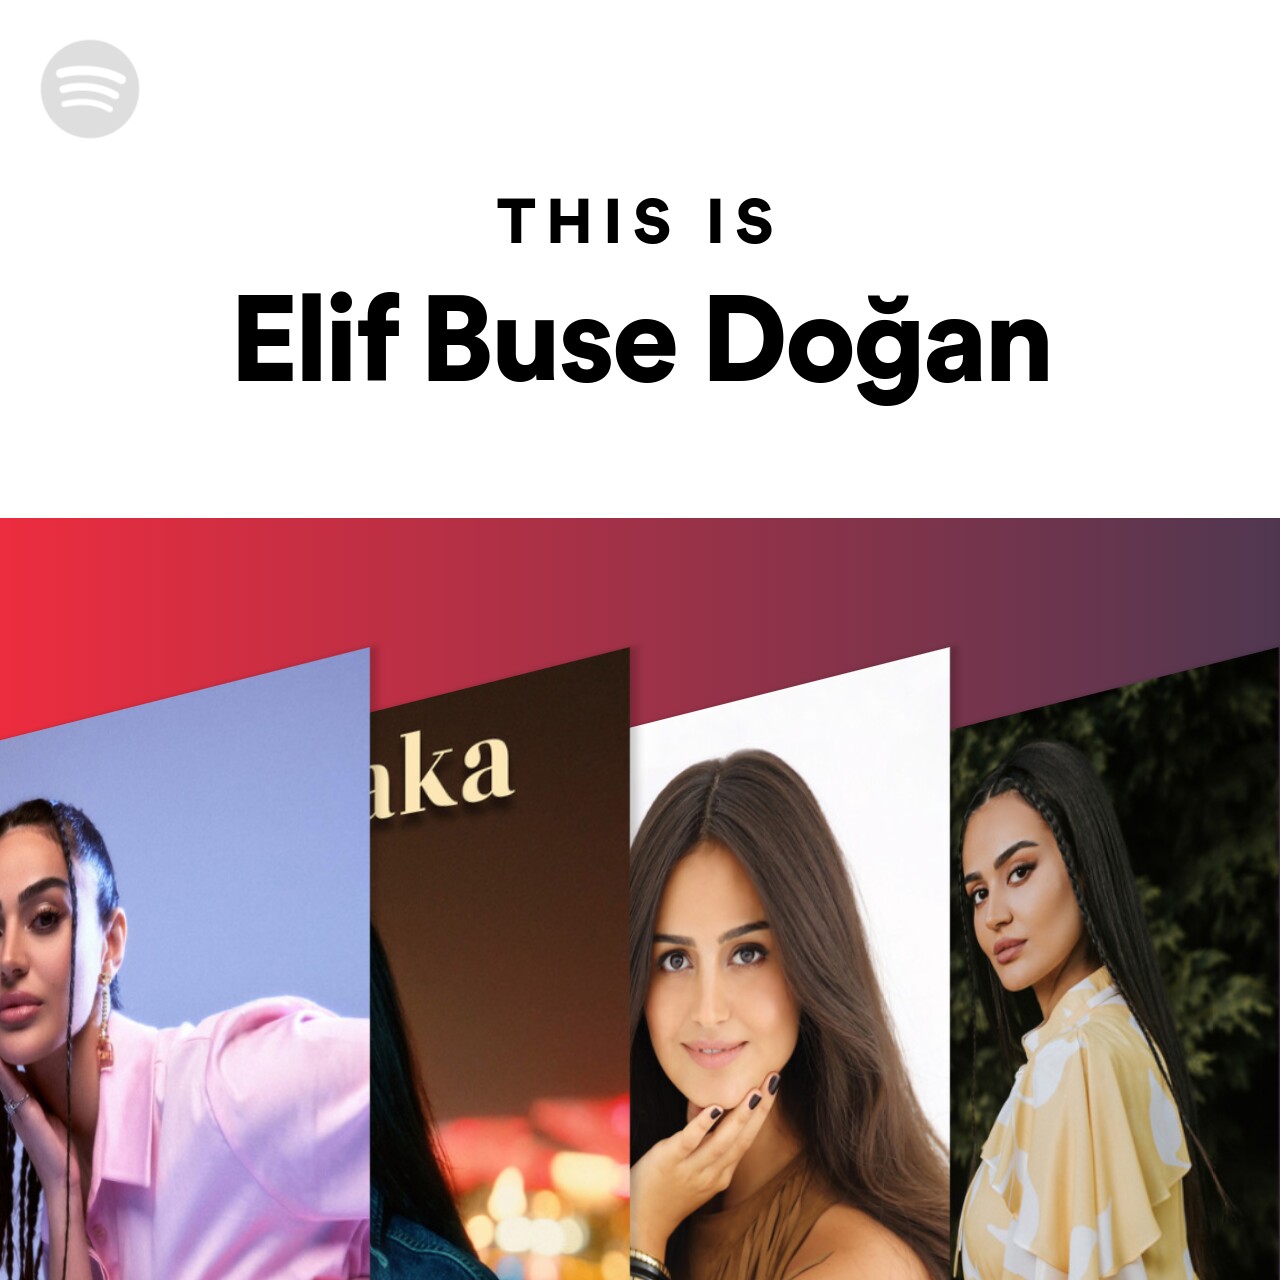 This Is Elif Buse Doğan